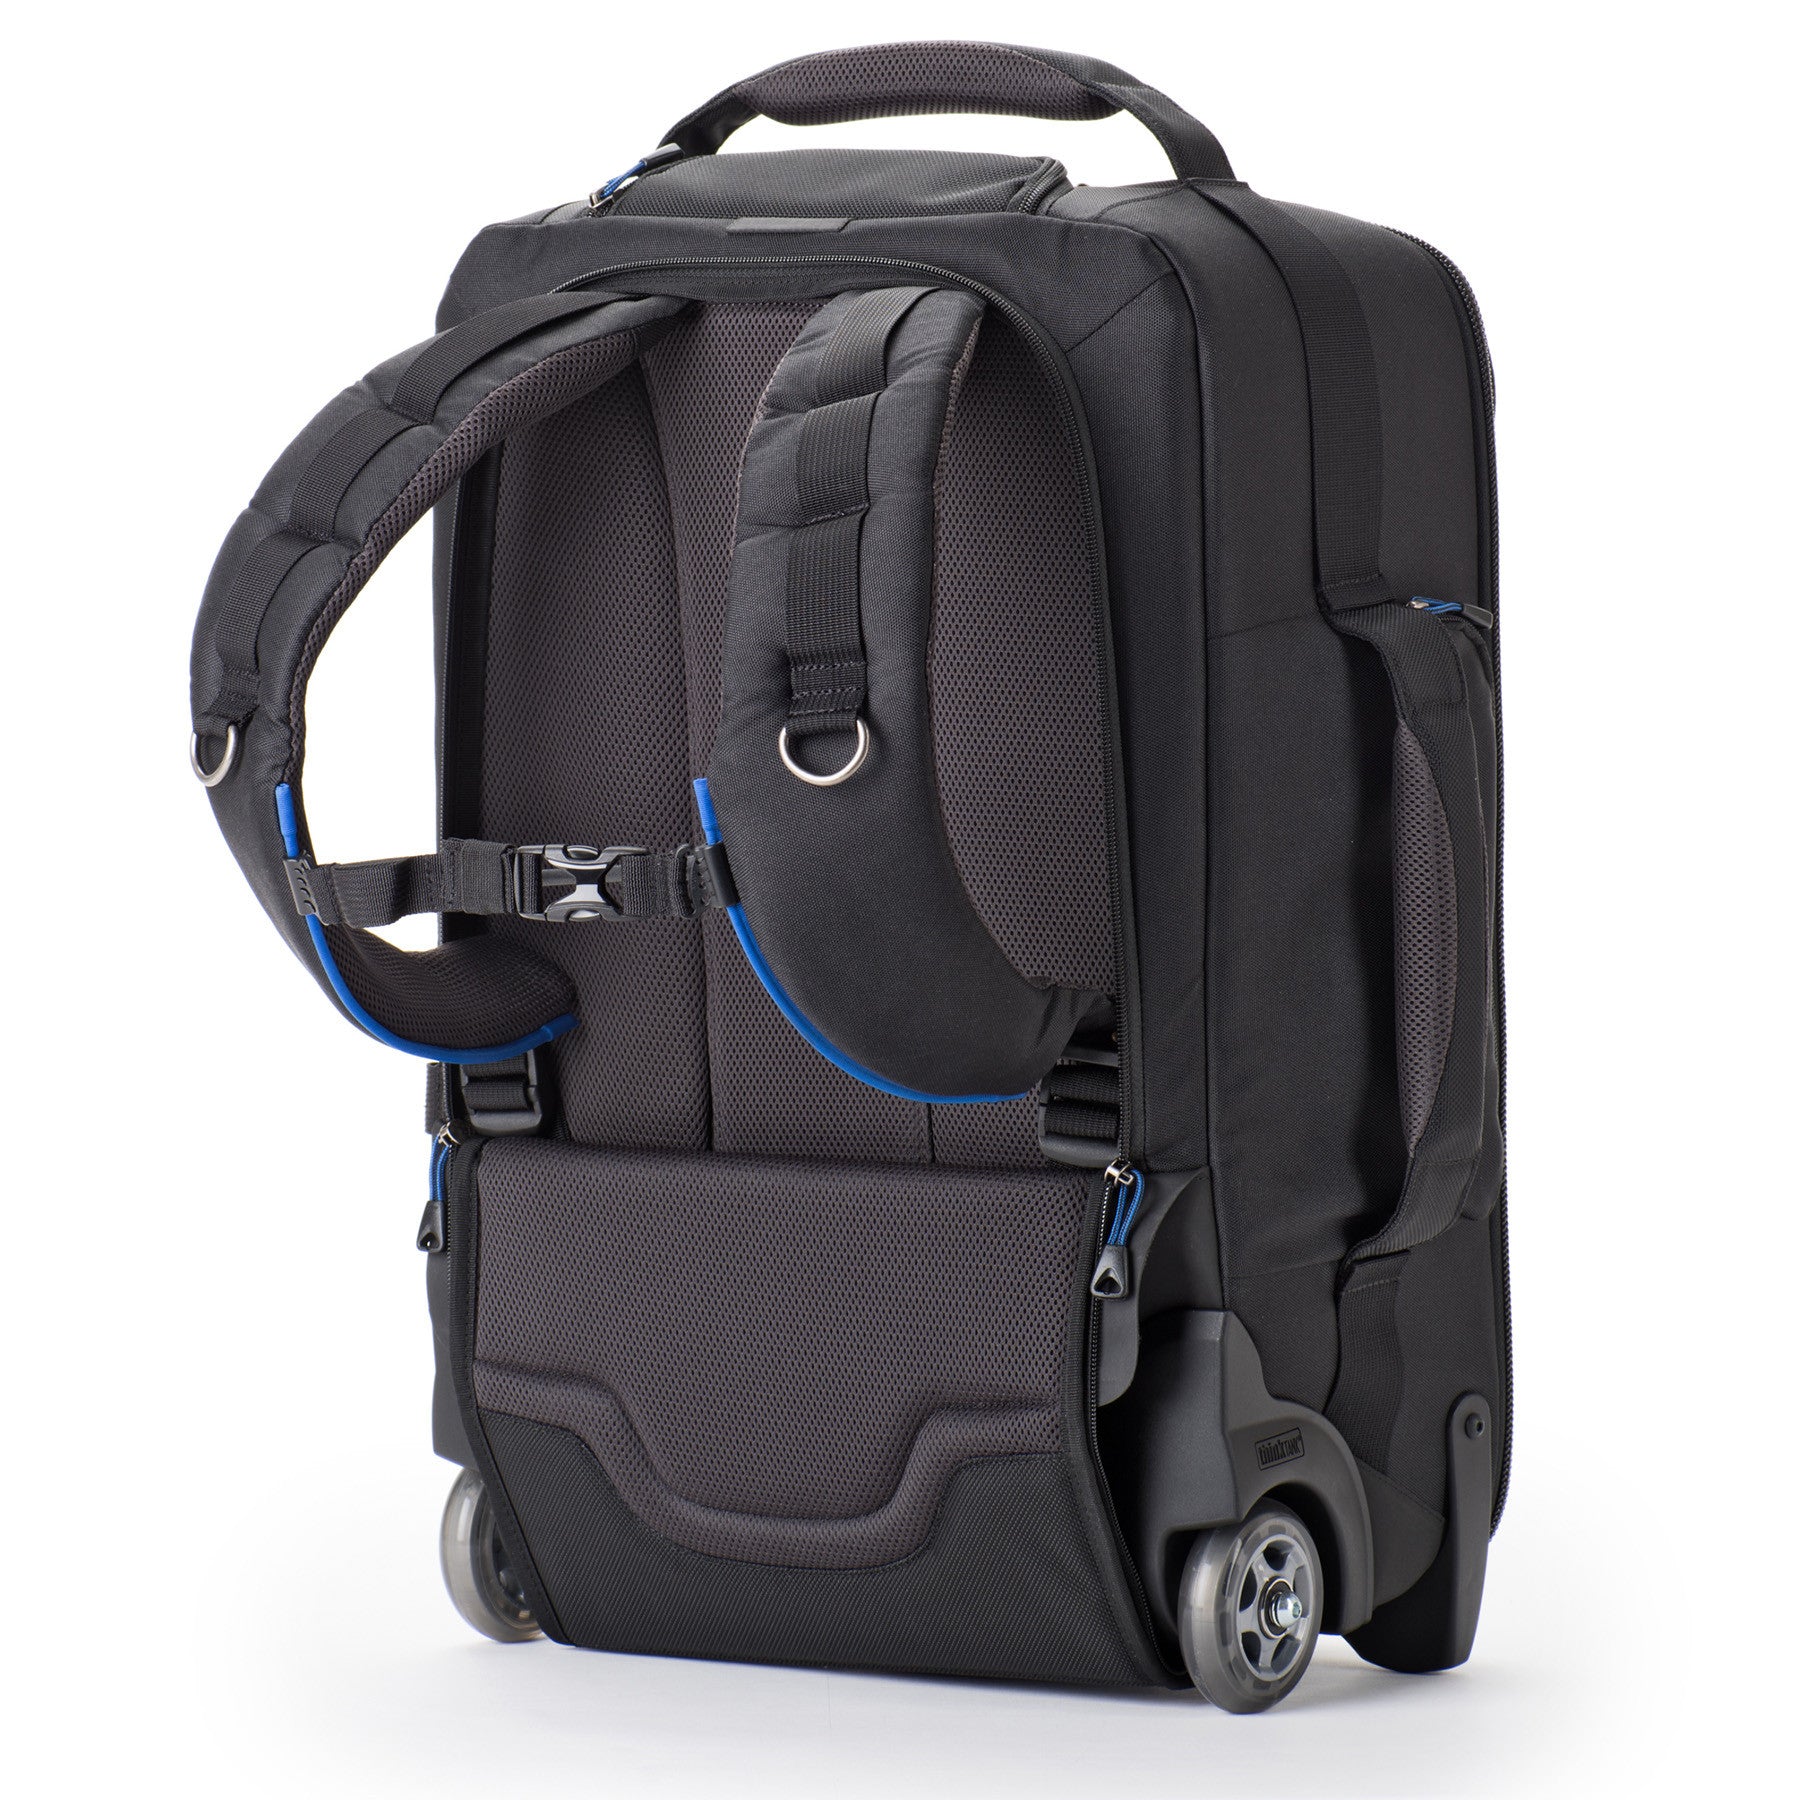 Integrated backpack straps with comfortable shoulder harness and back panel padding